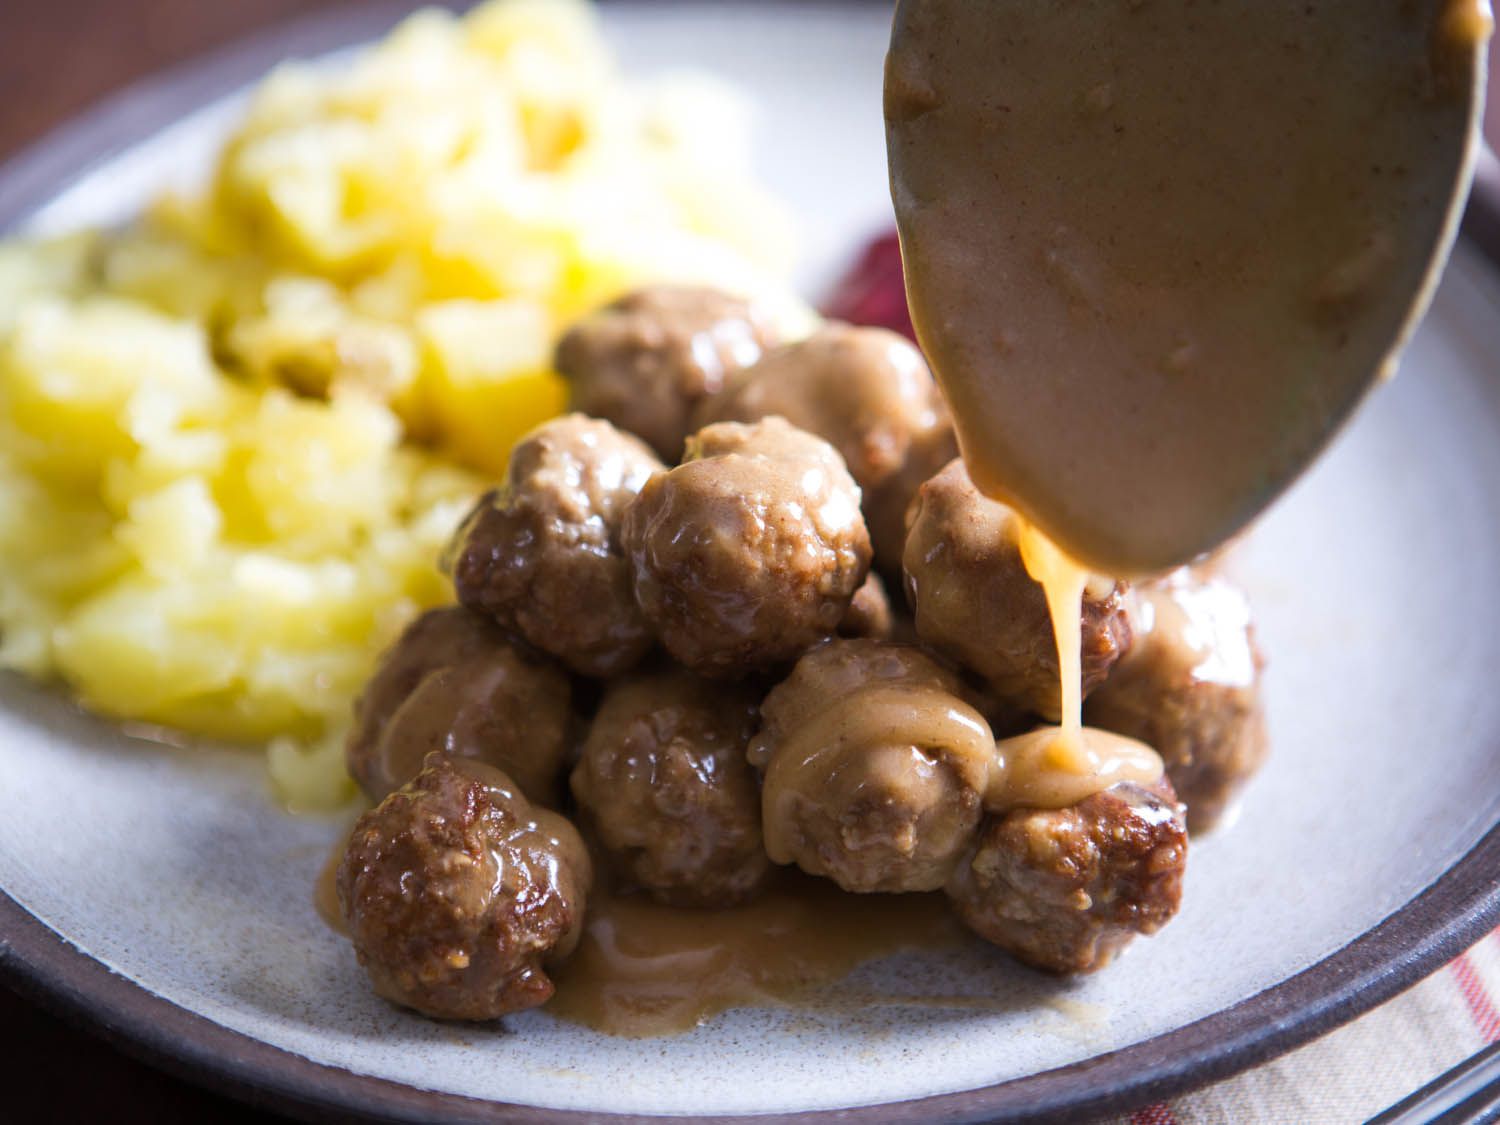 Pouring rich gravy over homemade Swedish meatballs.